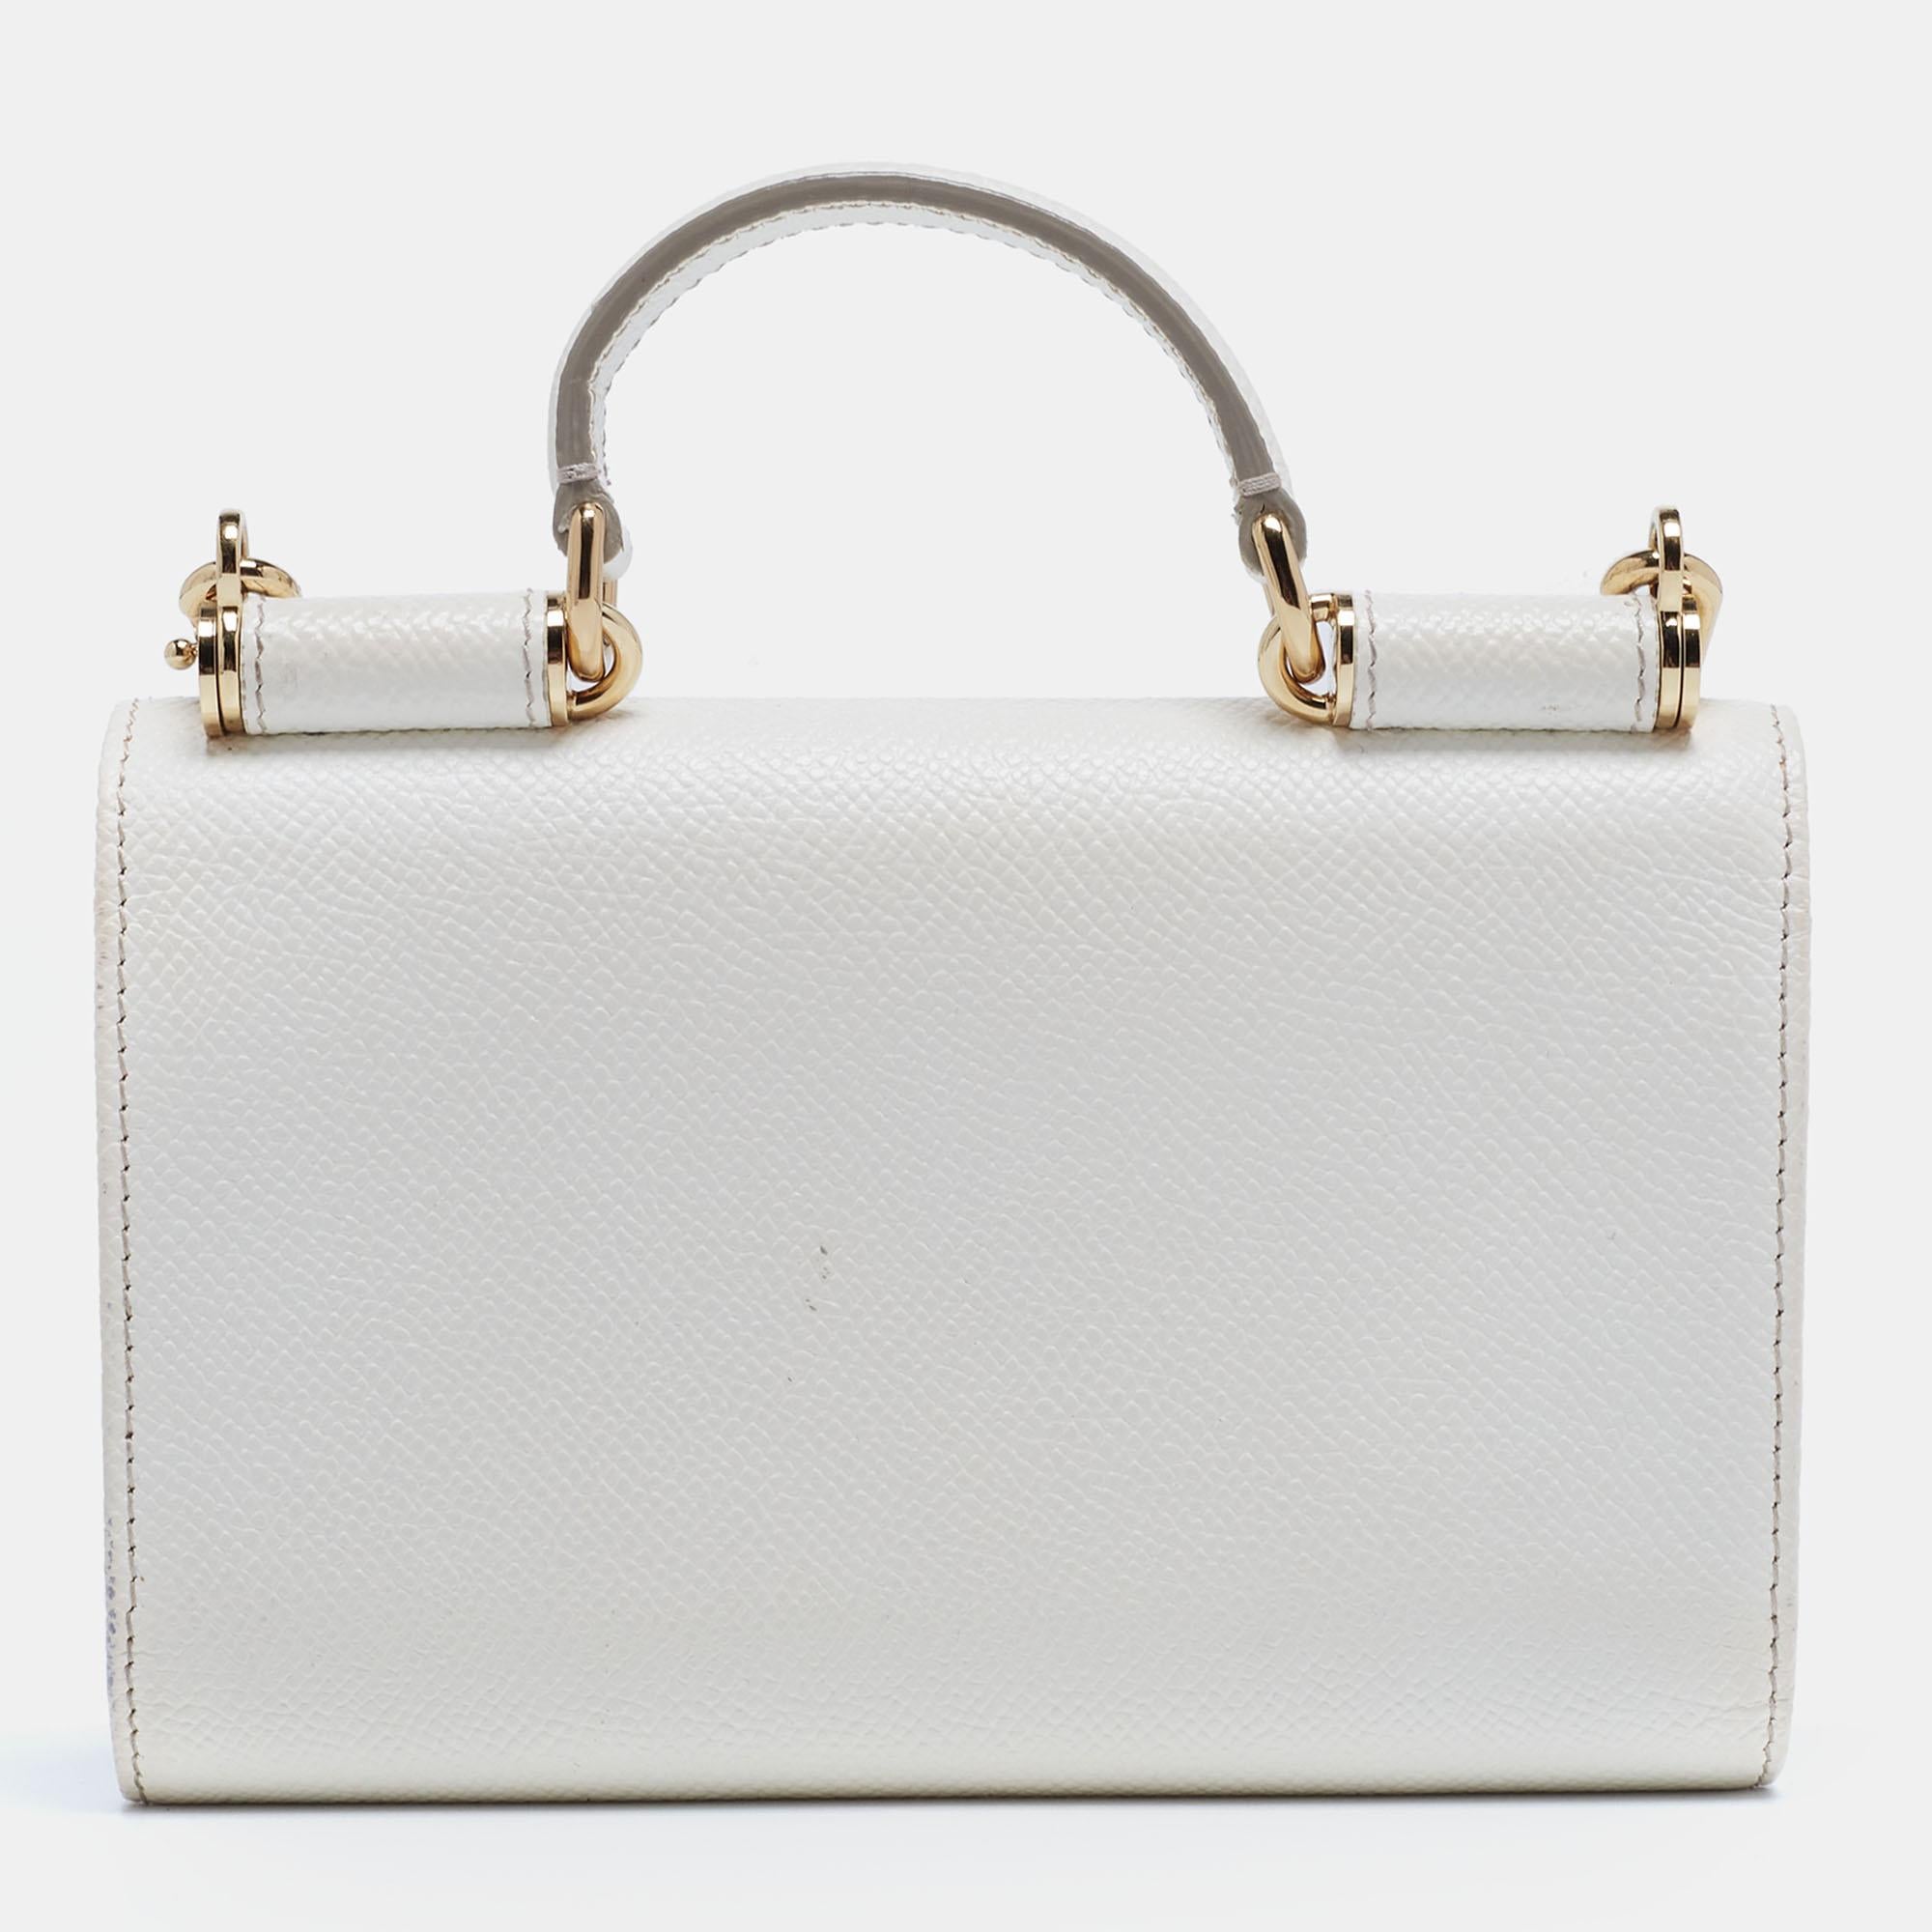 The striking silhouette of this Dolce & Gabbana Miss Sicily Von bag signifies impeccable Italian craftsmanship. Made from leather on the exterior, it flaunts a chain strap. a small handle, a brand signature on the front, and gold-tone hardware. The